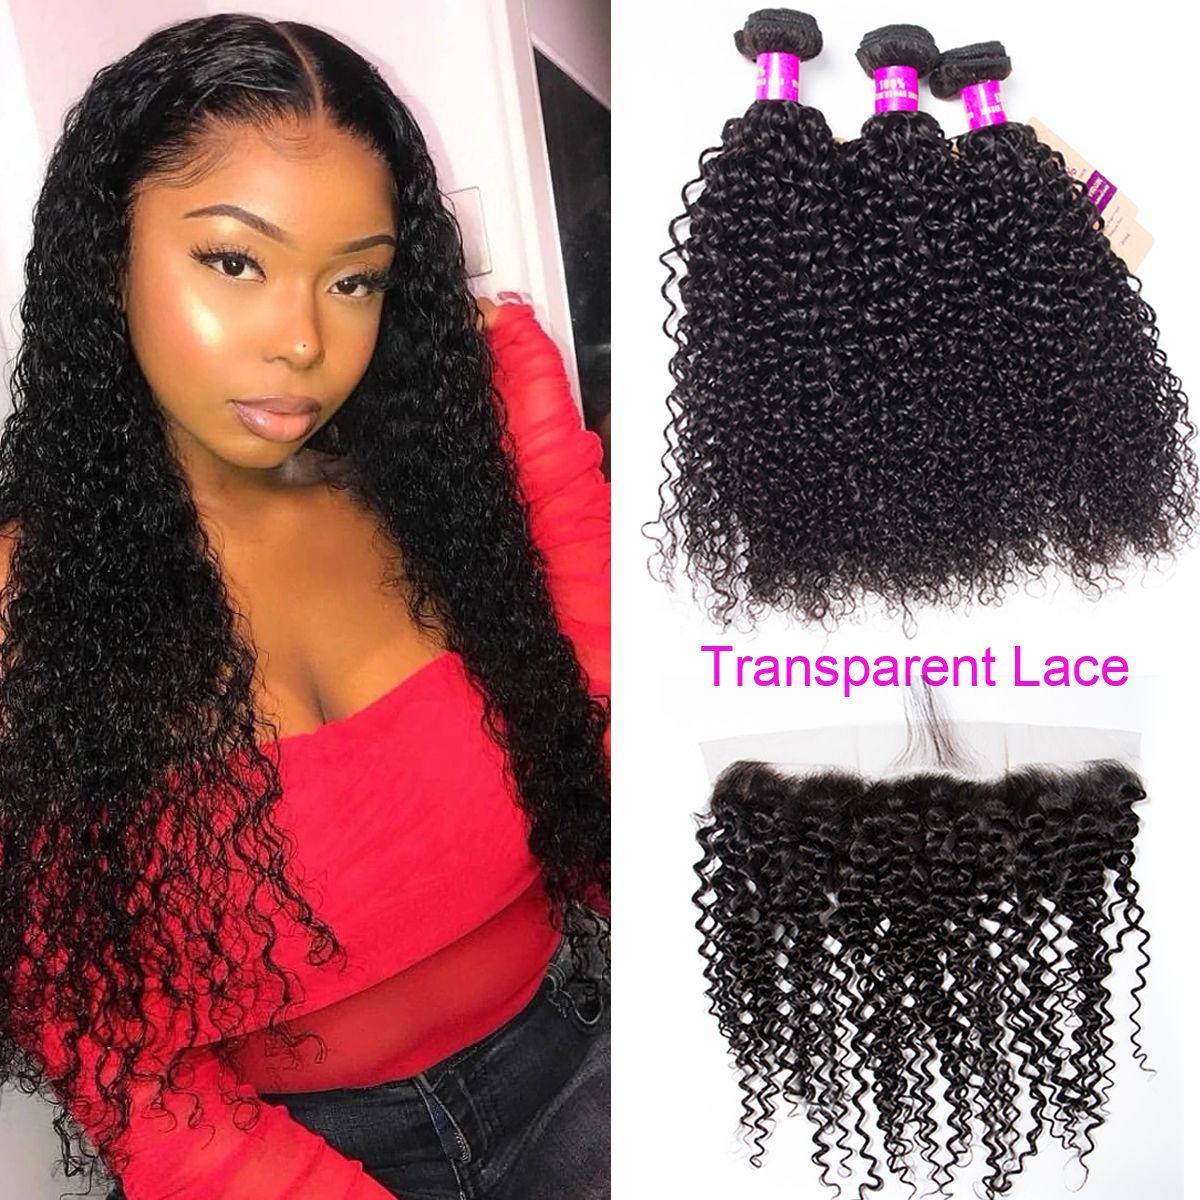 Curly Weave Human Hair 3 Bundle with 13×4 Transparent Lace Frontal Closure